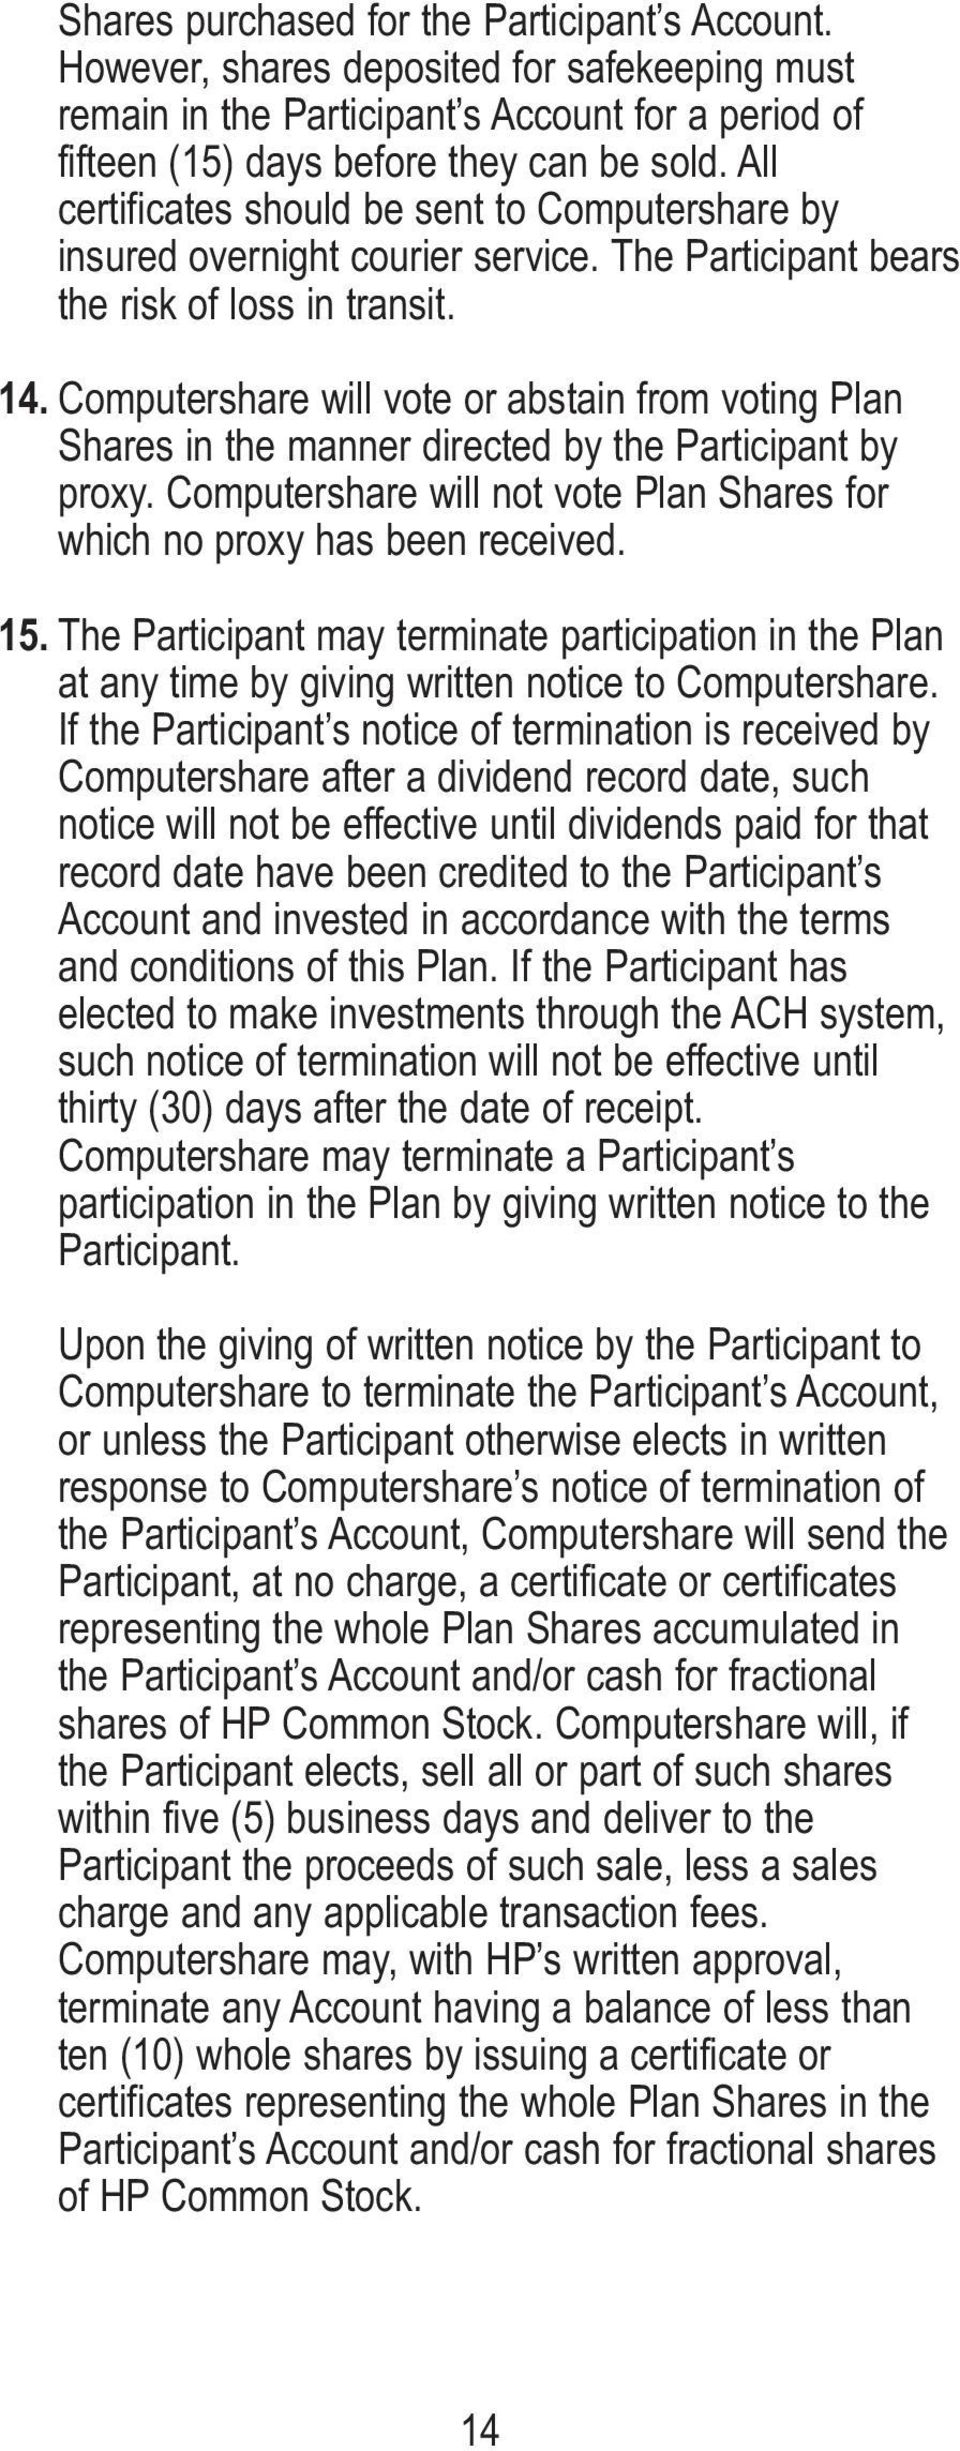 Computershare will vote or abstain from voting Plan Shares in the manner directed by the Participant by proxy. Computershare will not vote Plan Shares for which no proxy has been received. 15.